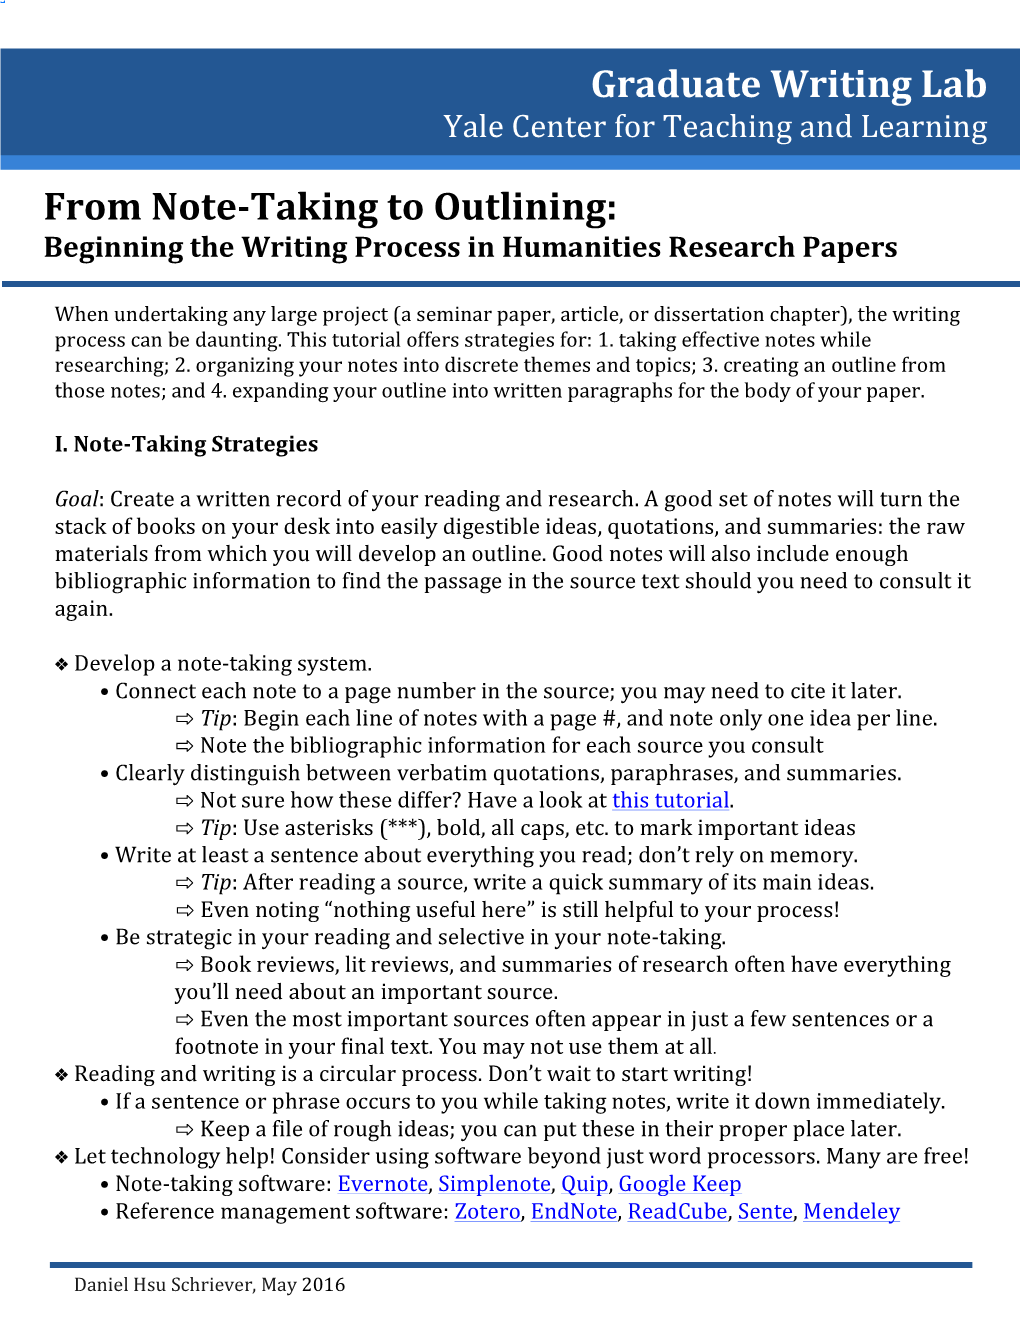 From Note-Taking to Outlining: Beginning the Writing Process in Humanities Research Papers